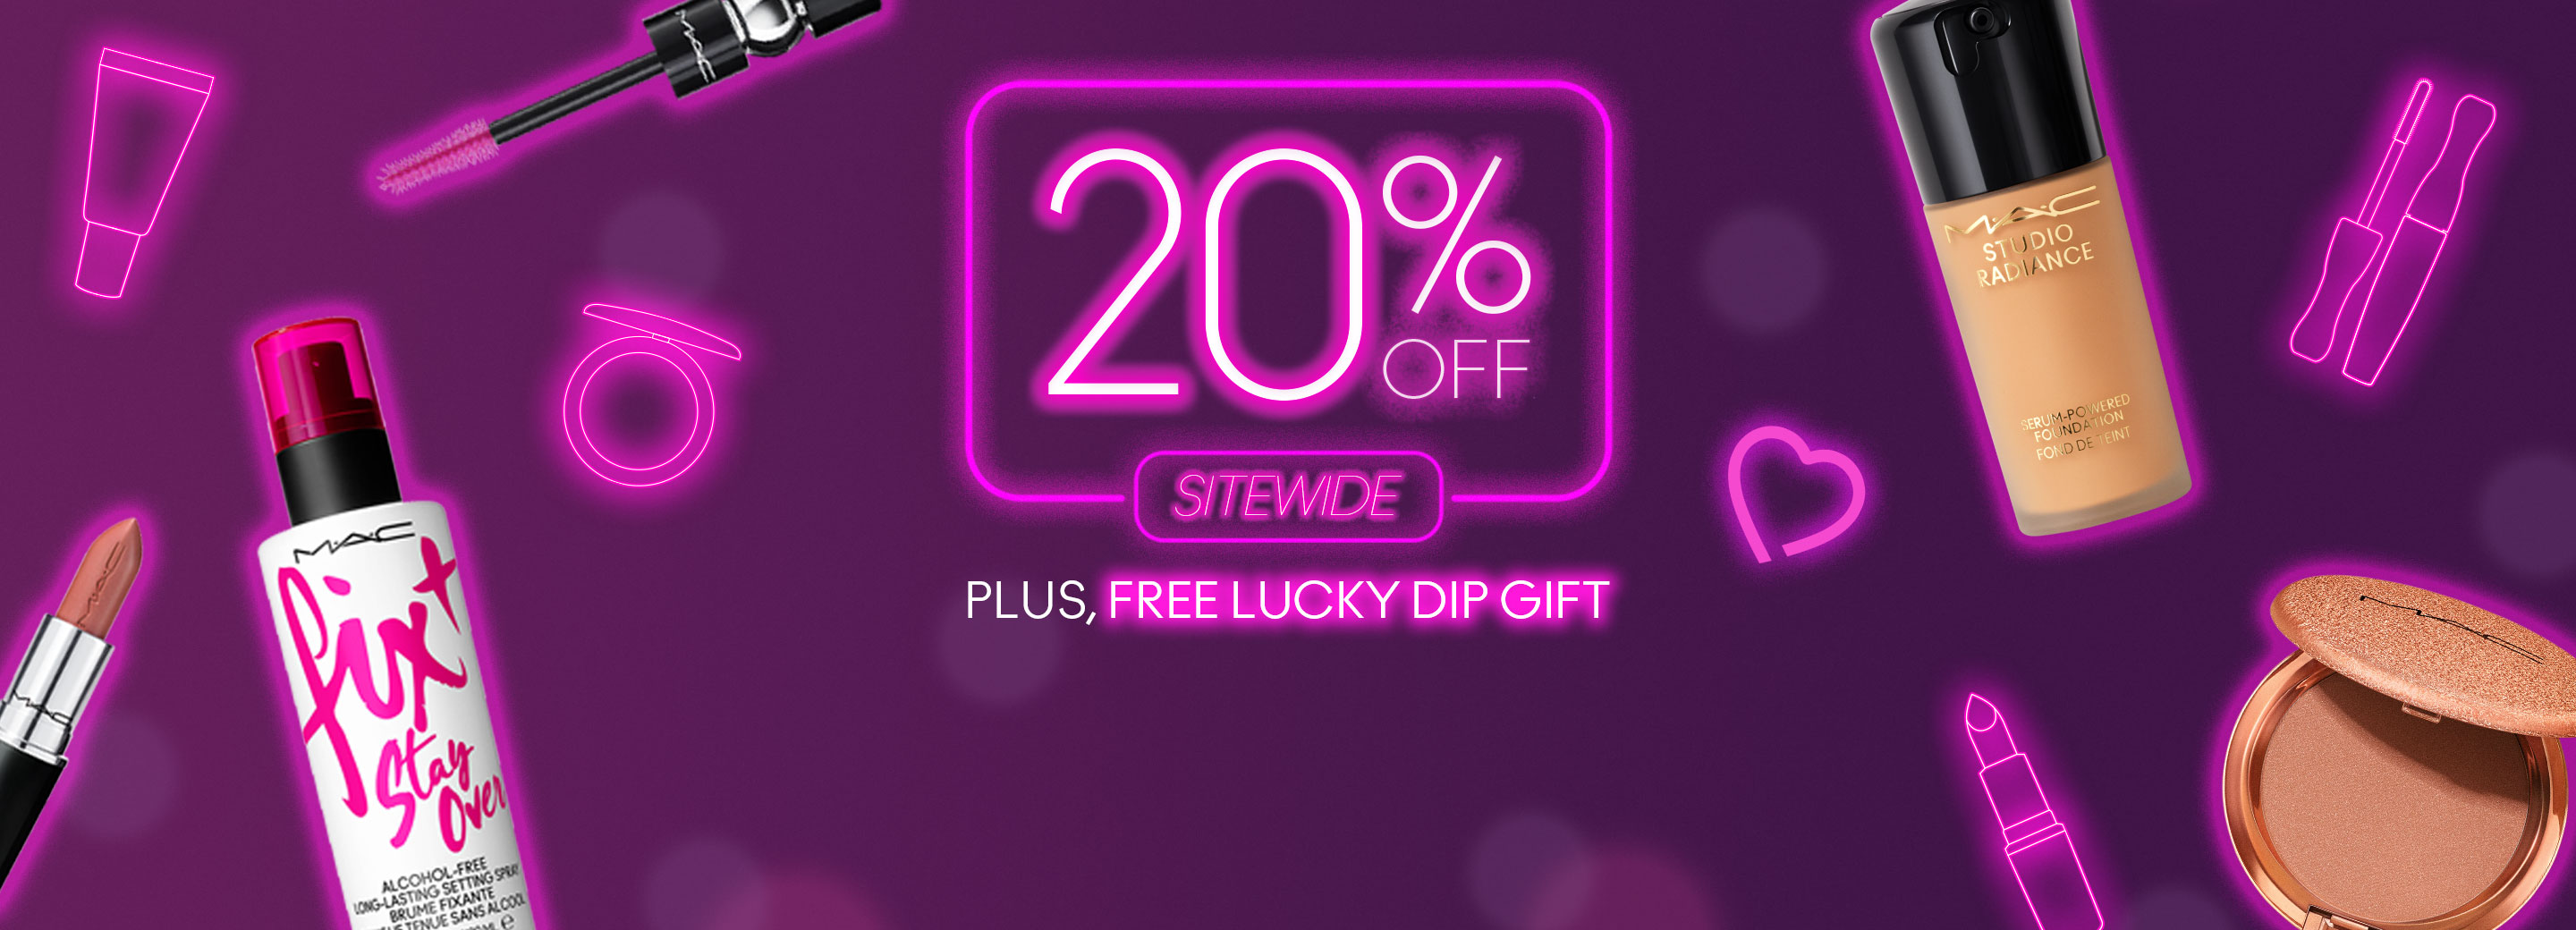 20% OFF Sitewide plus FREE a free lucky dip gift